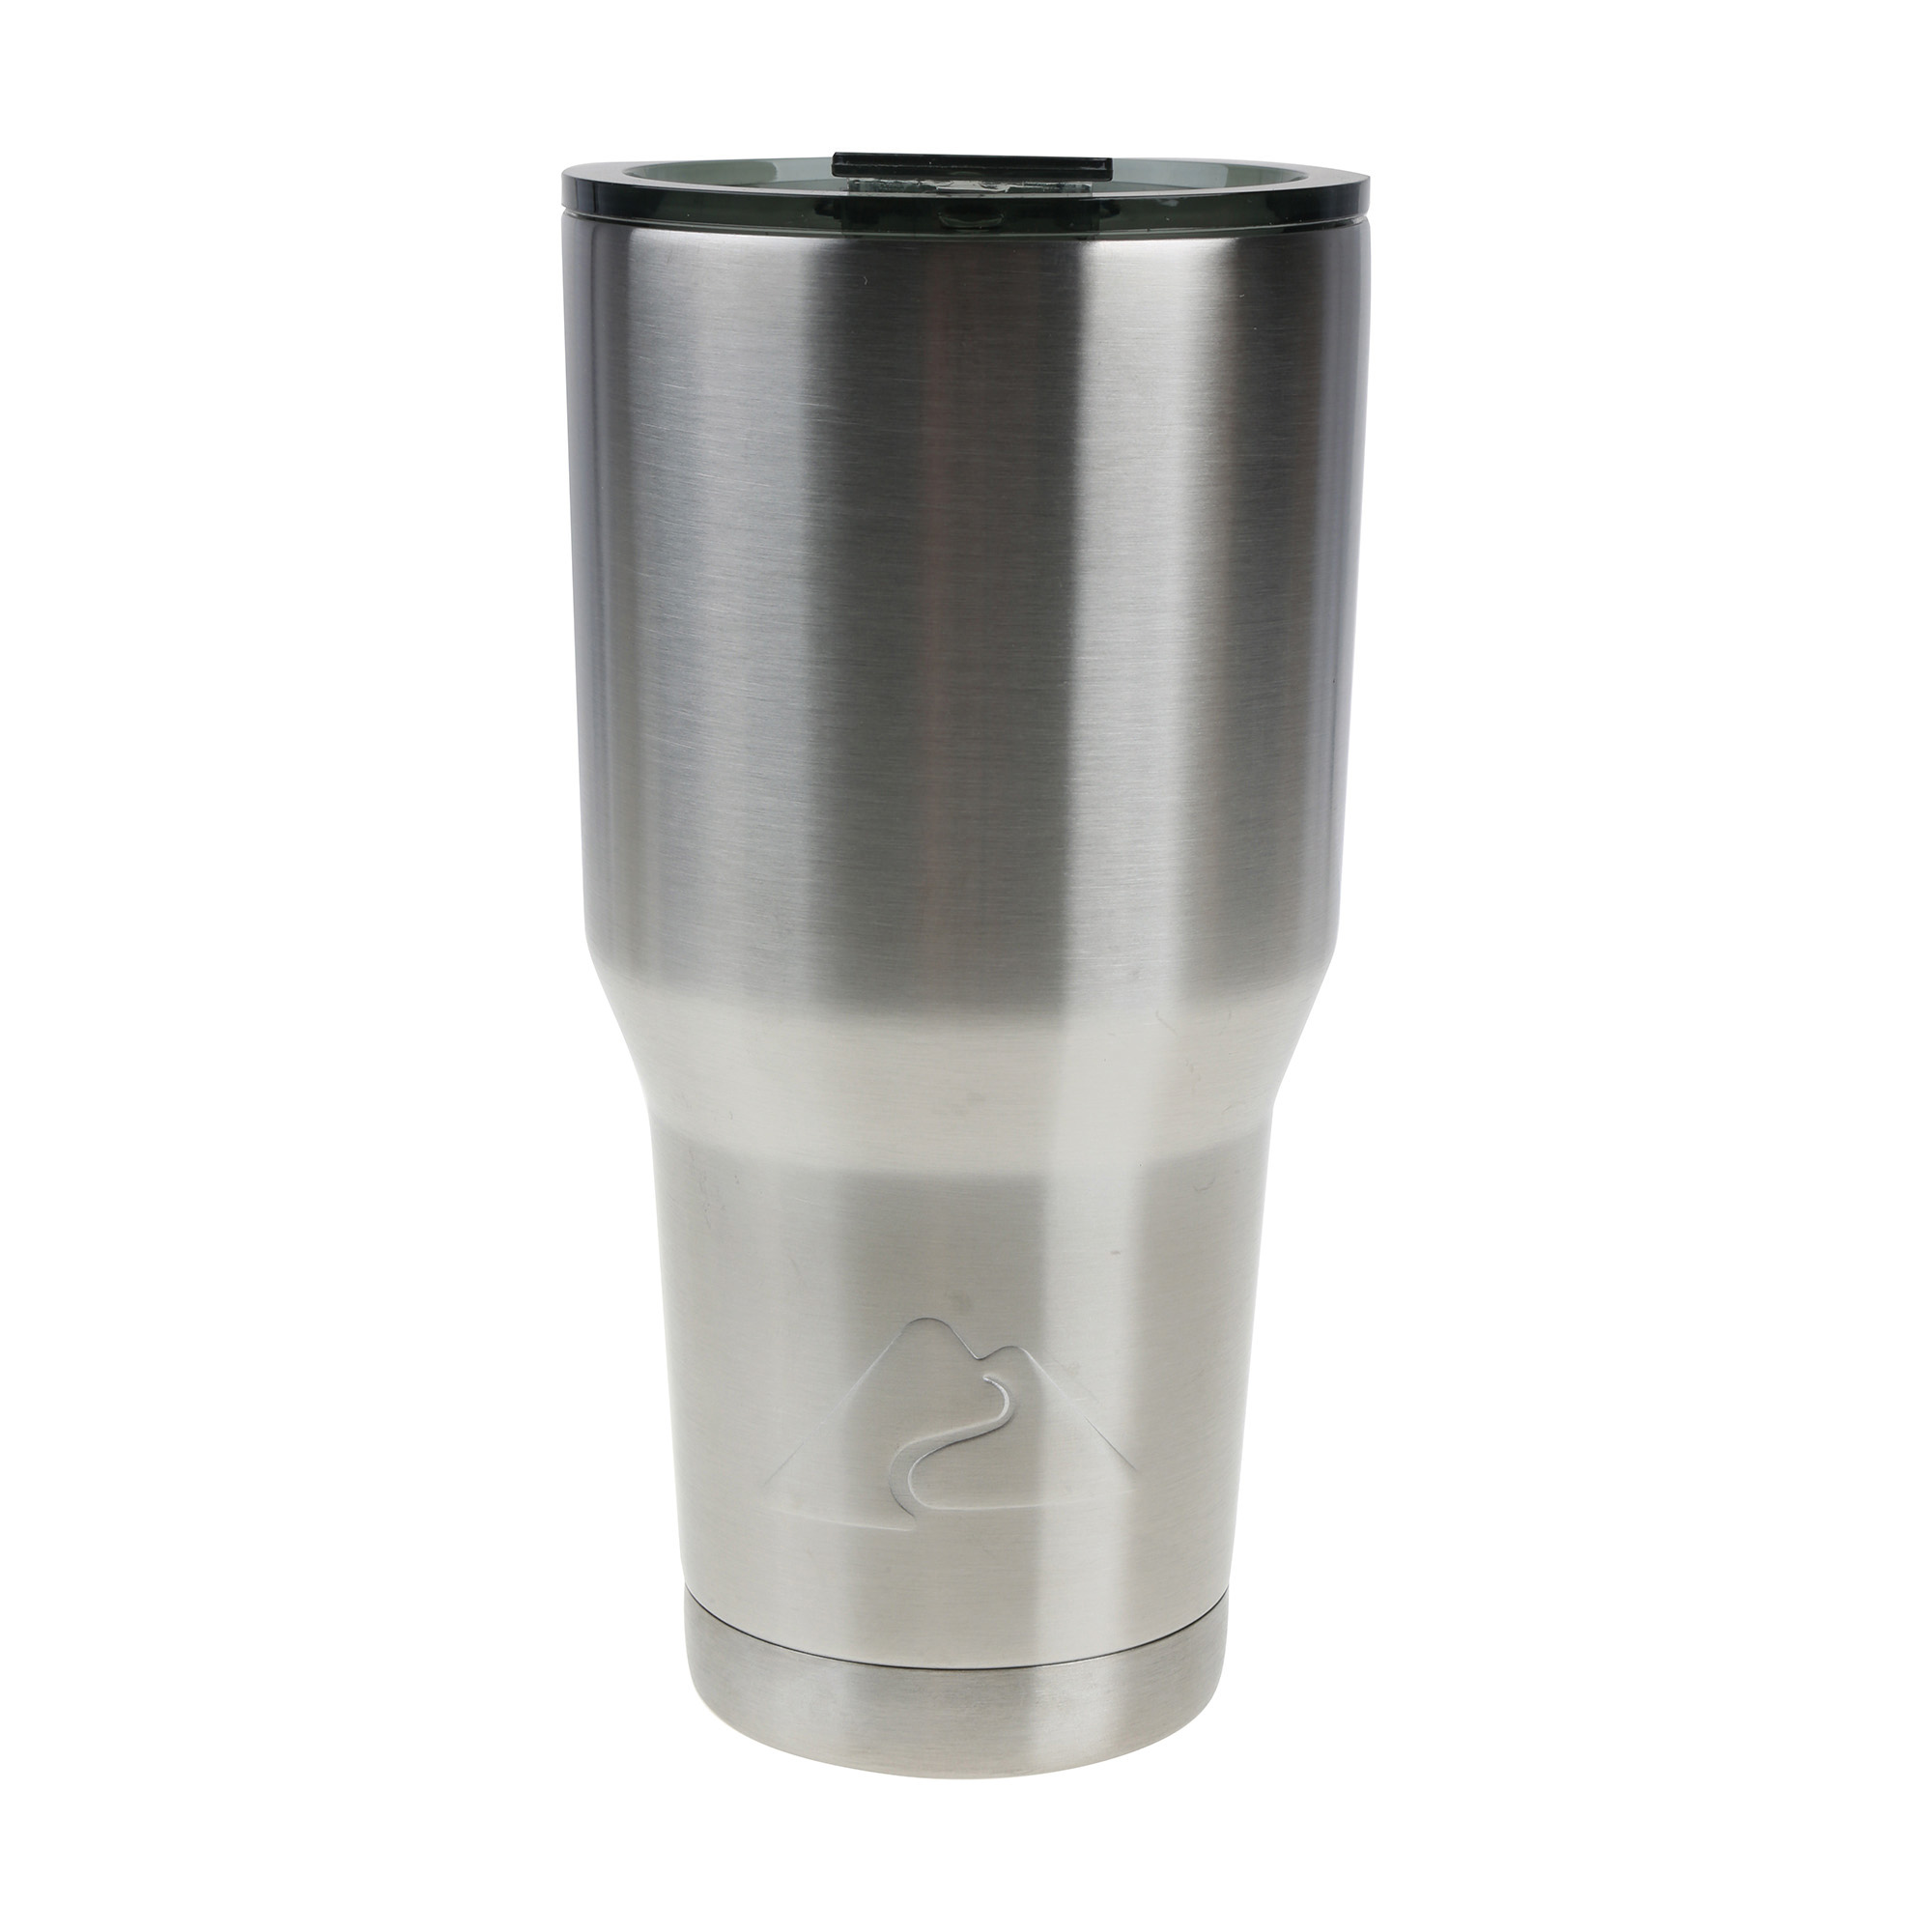 Ozark Trail Double Wall Vacuum Sealed Stainless Steel Tumbler, 30 oz - image 8 of 8